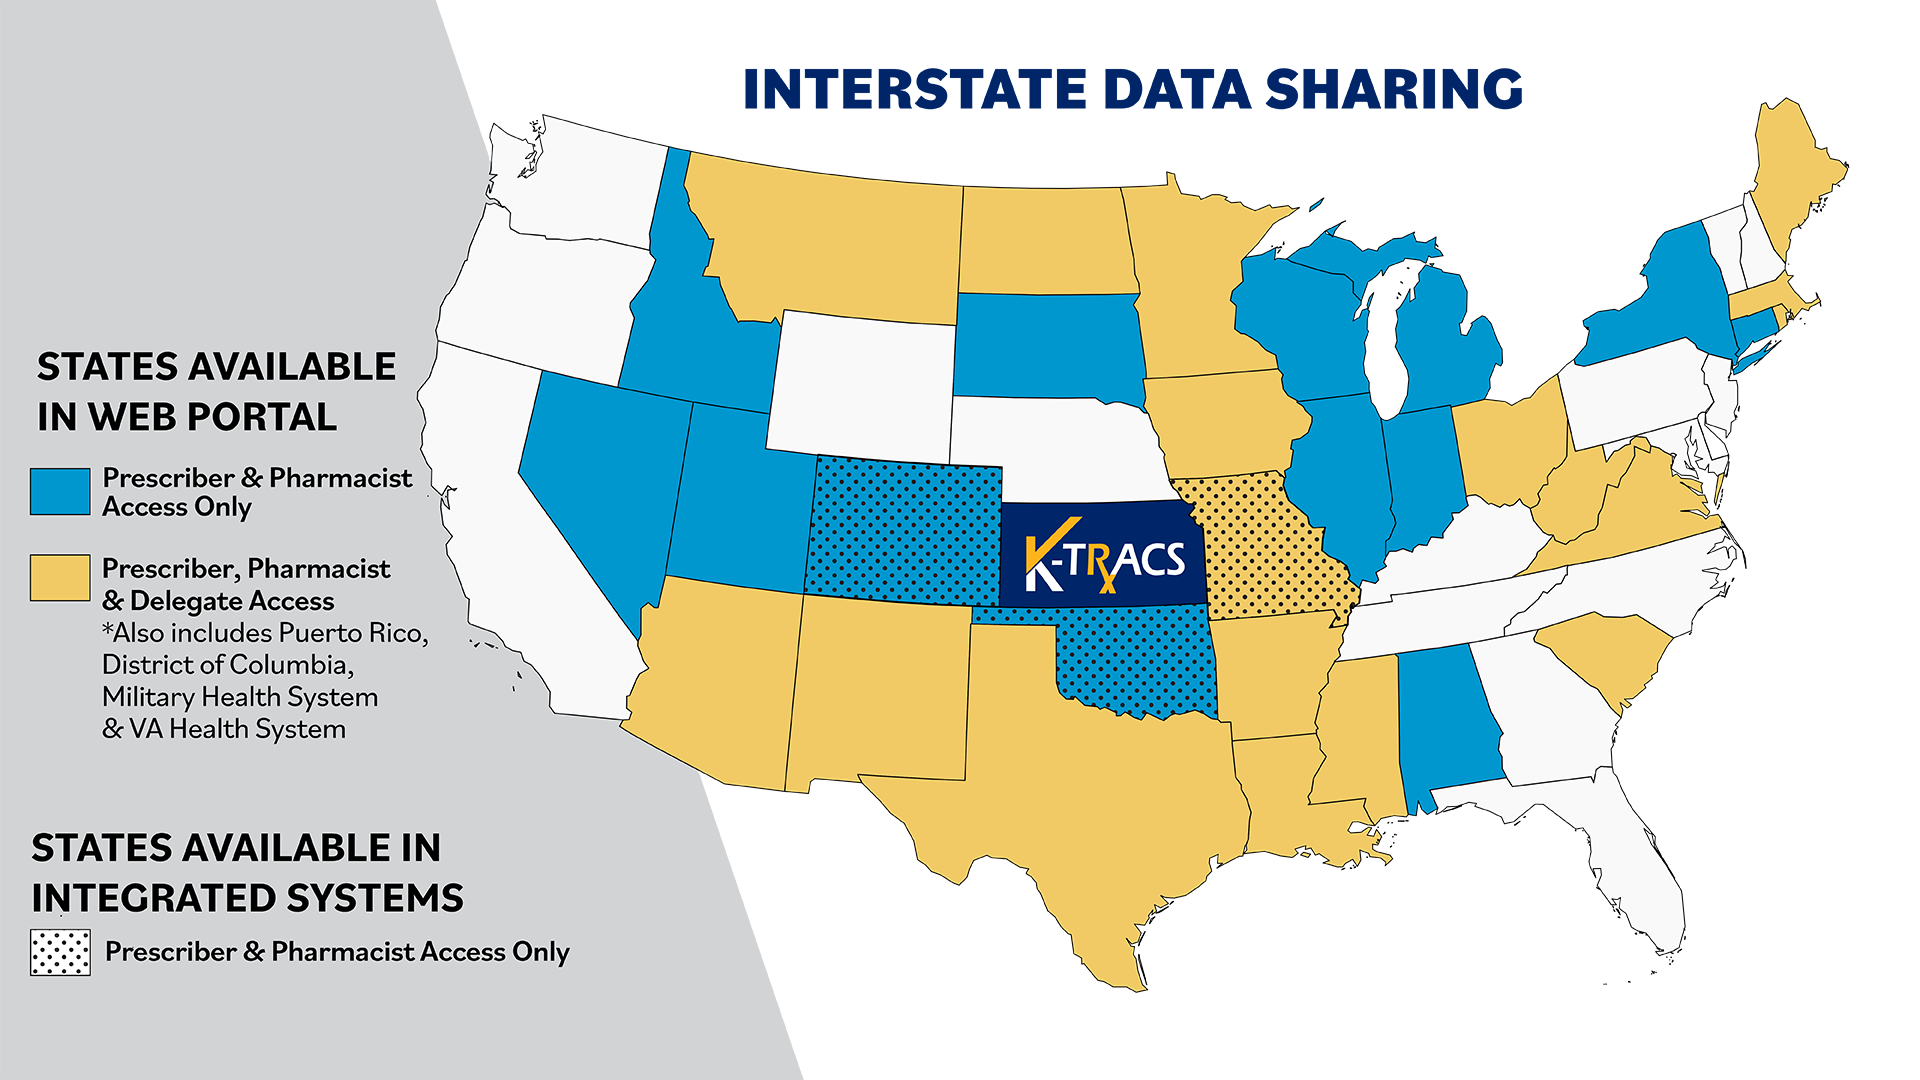 Interstate data sharing map by type of access